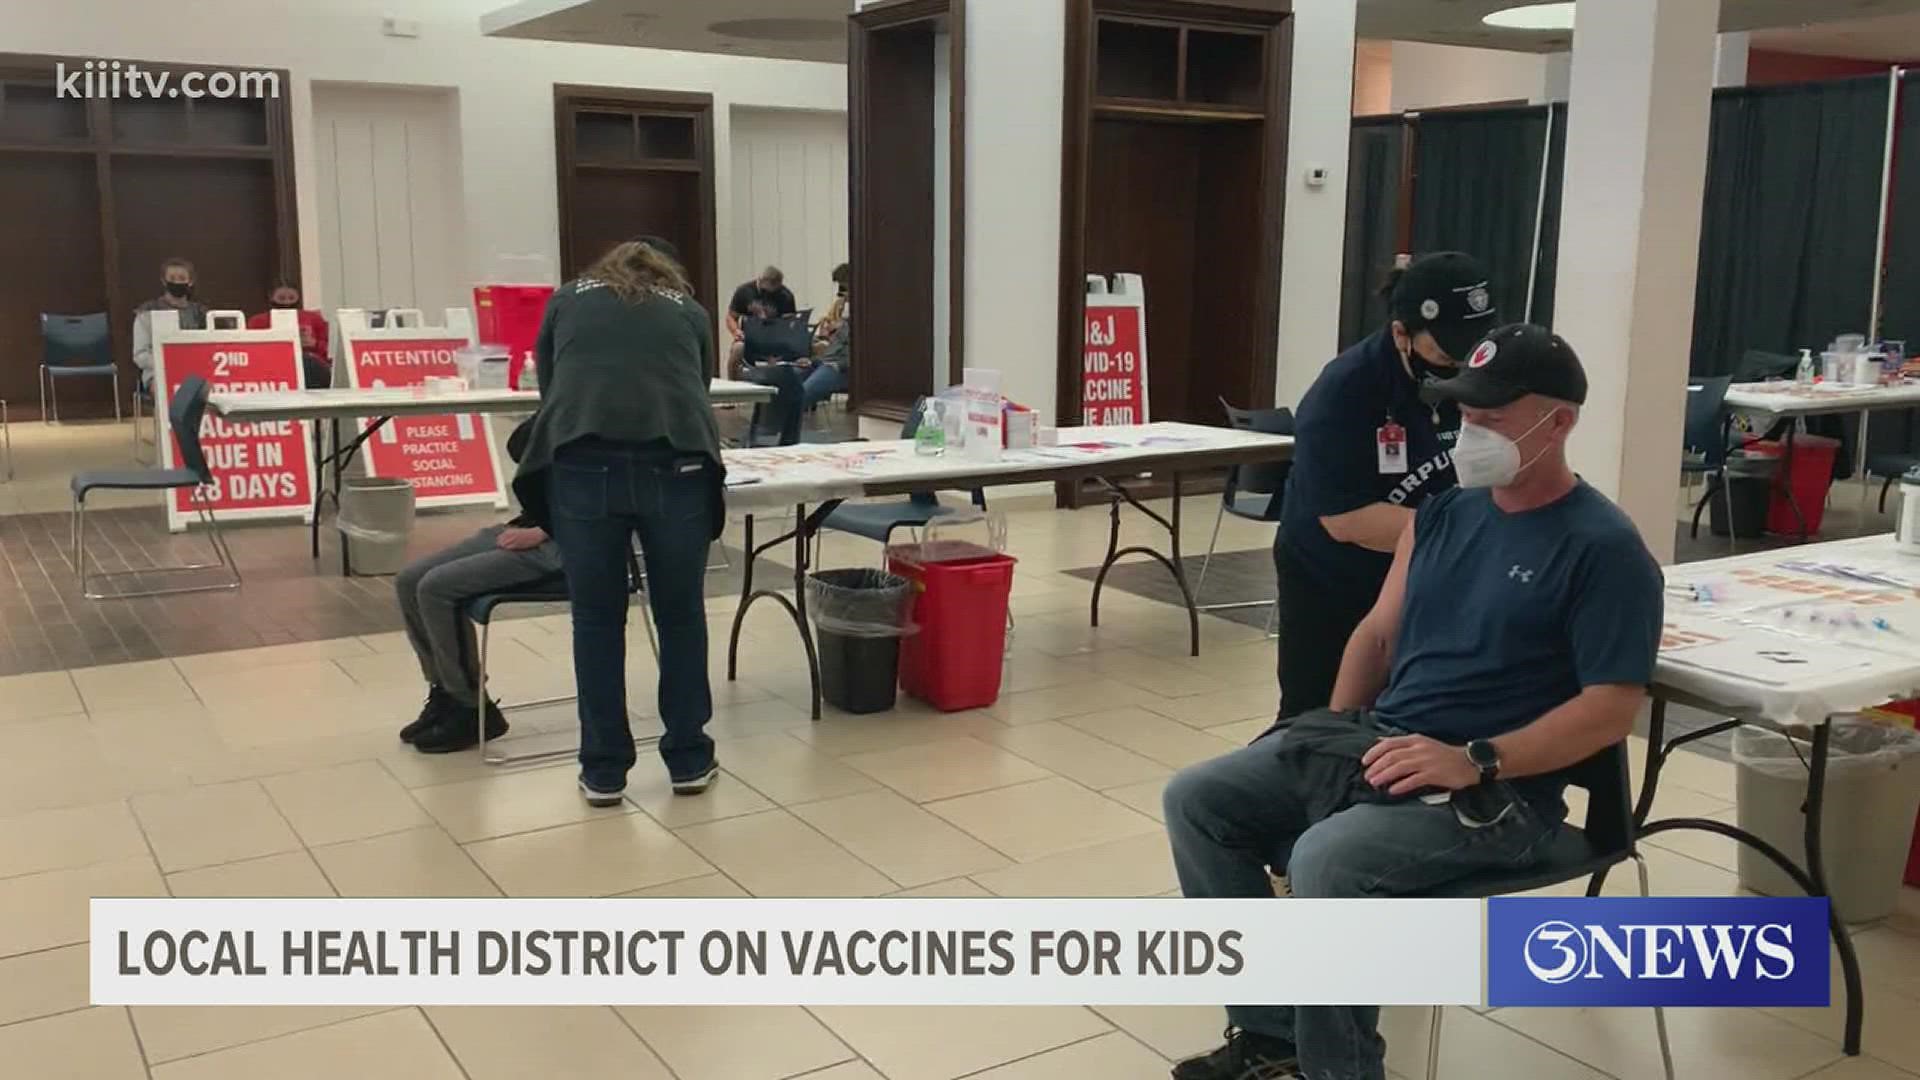 Right now, the health district has vaccination clinics set up at the mall and next to the health department on Greenwood.